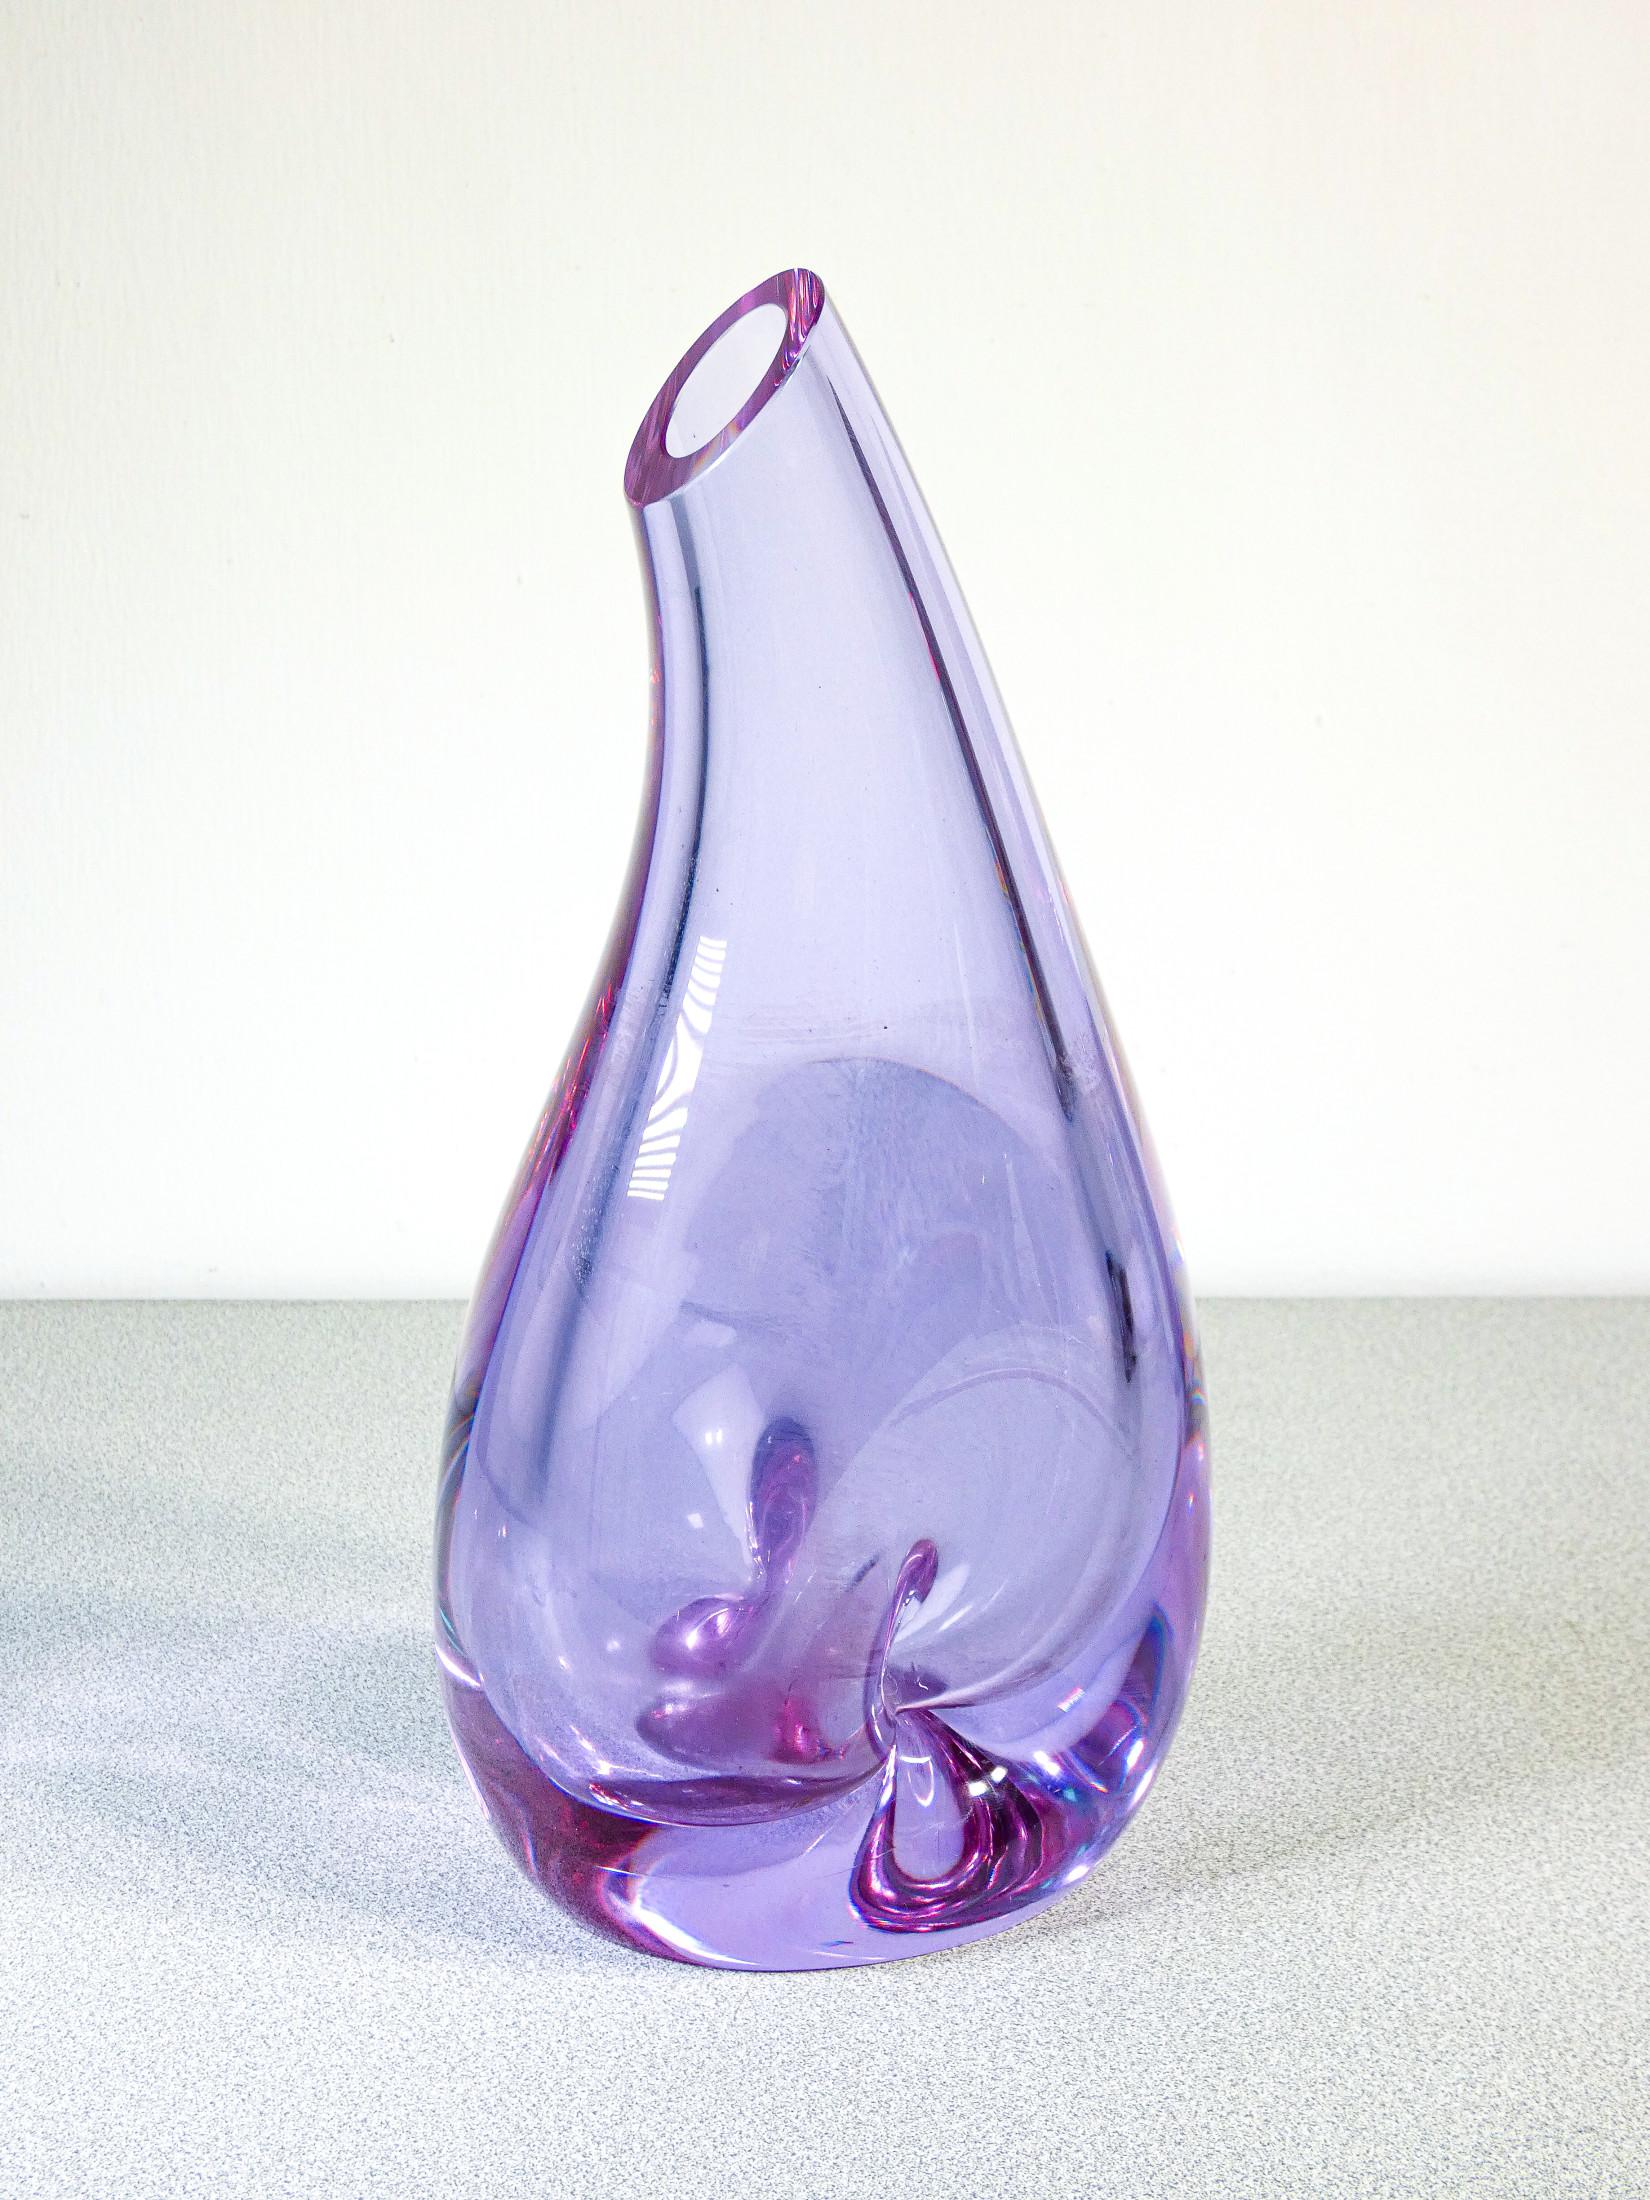 Blown glass vase
by SEVRES.
Coloration varies
appreciably to
depending on the light,
from light blue to violet.

ORIGIN
France

PERIOD
Anni 80

MARK
SEVRES
(signed on the bottom)

MATERIALS
Blown glass

DIMENSIONS
Height : 30cm
Width: 14.5cm
Depth:-